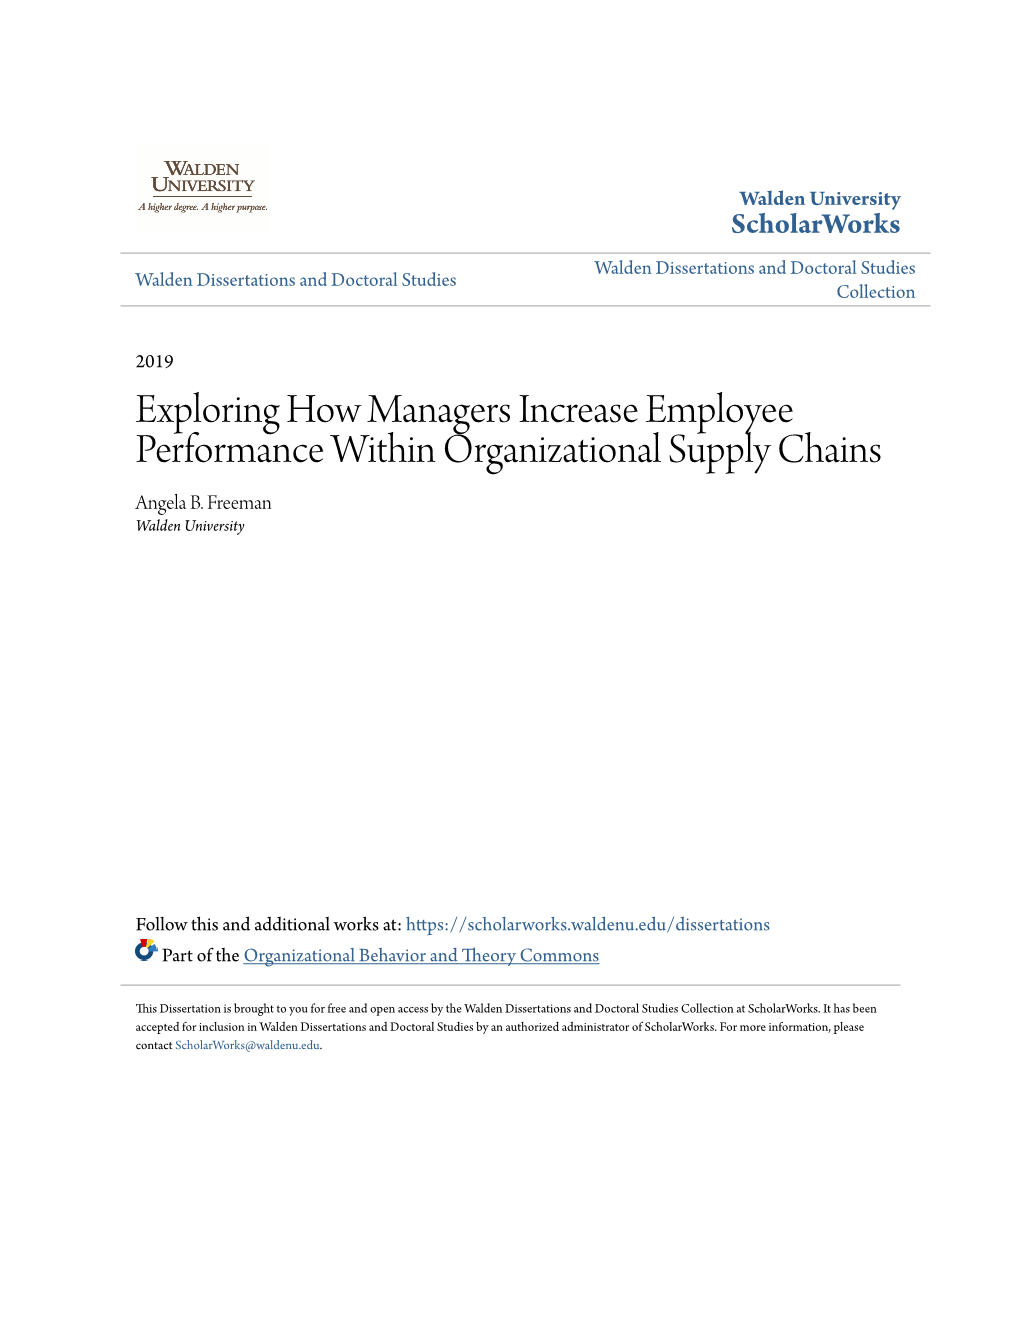 Exploring How Managers Increase Employee Performance Within Organizational Supply Chains Angela B